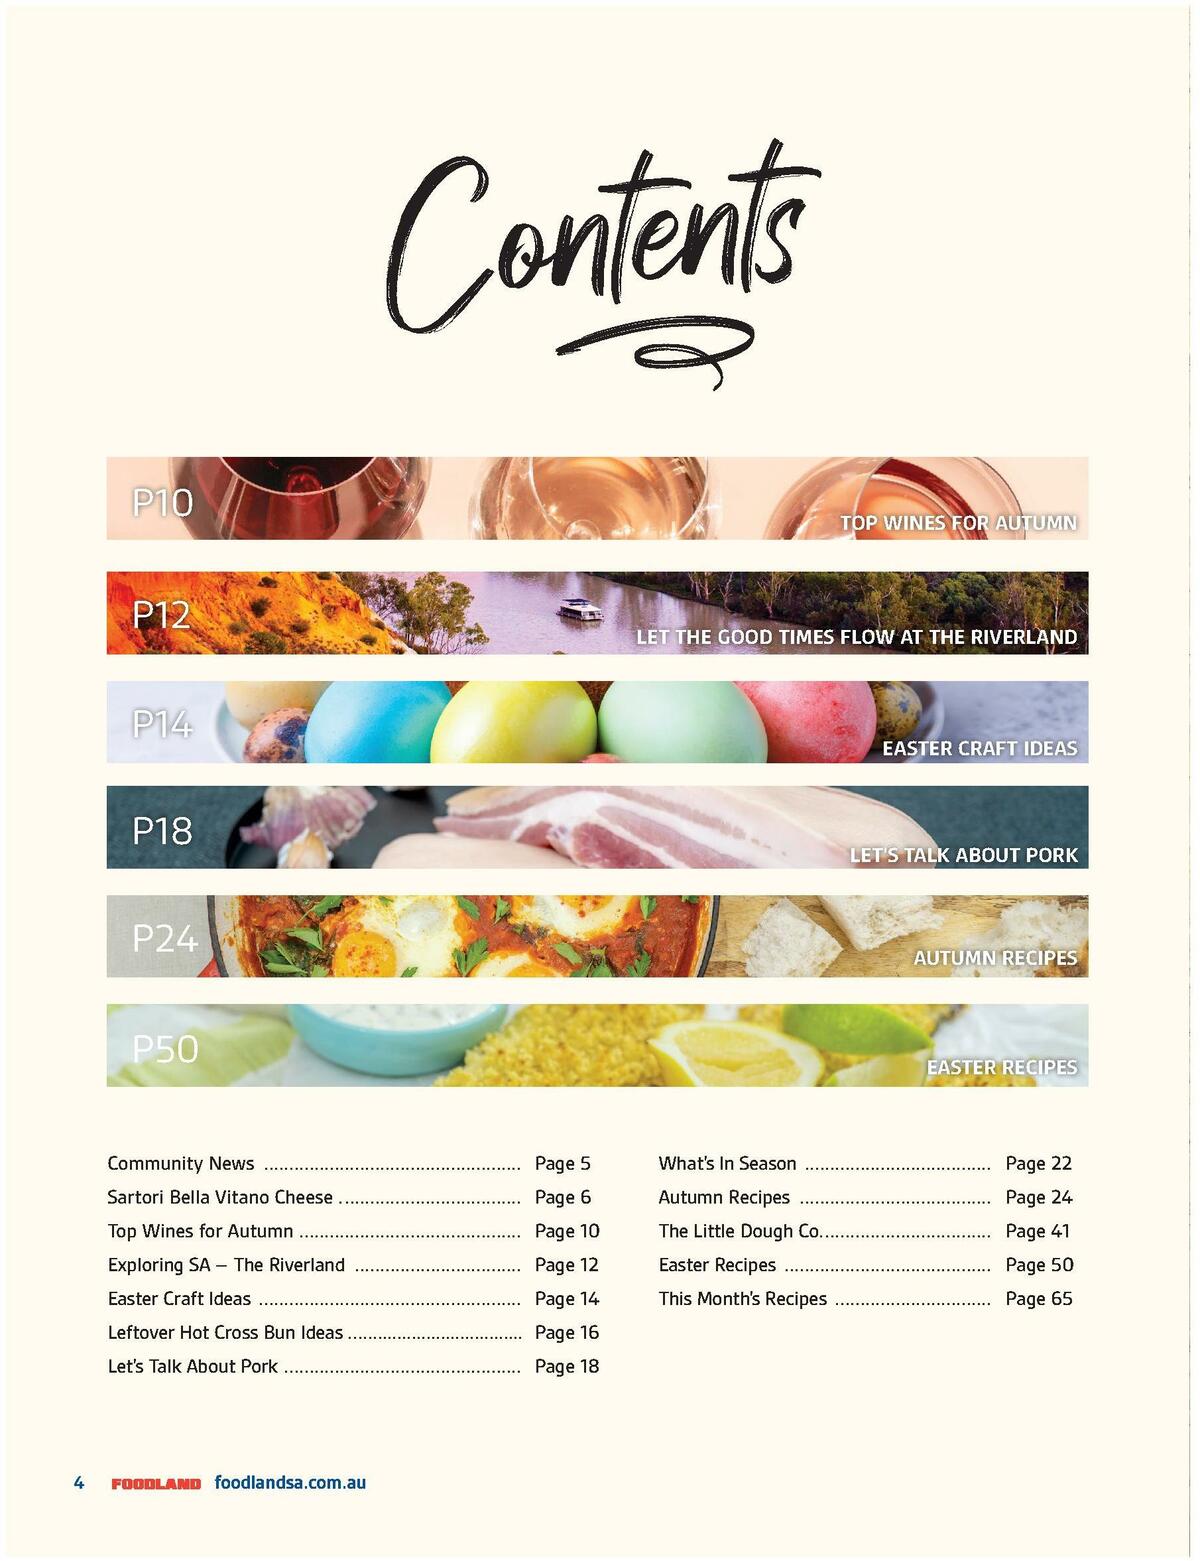 Foodland Magazine Autumn Catalogues from 1 March